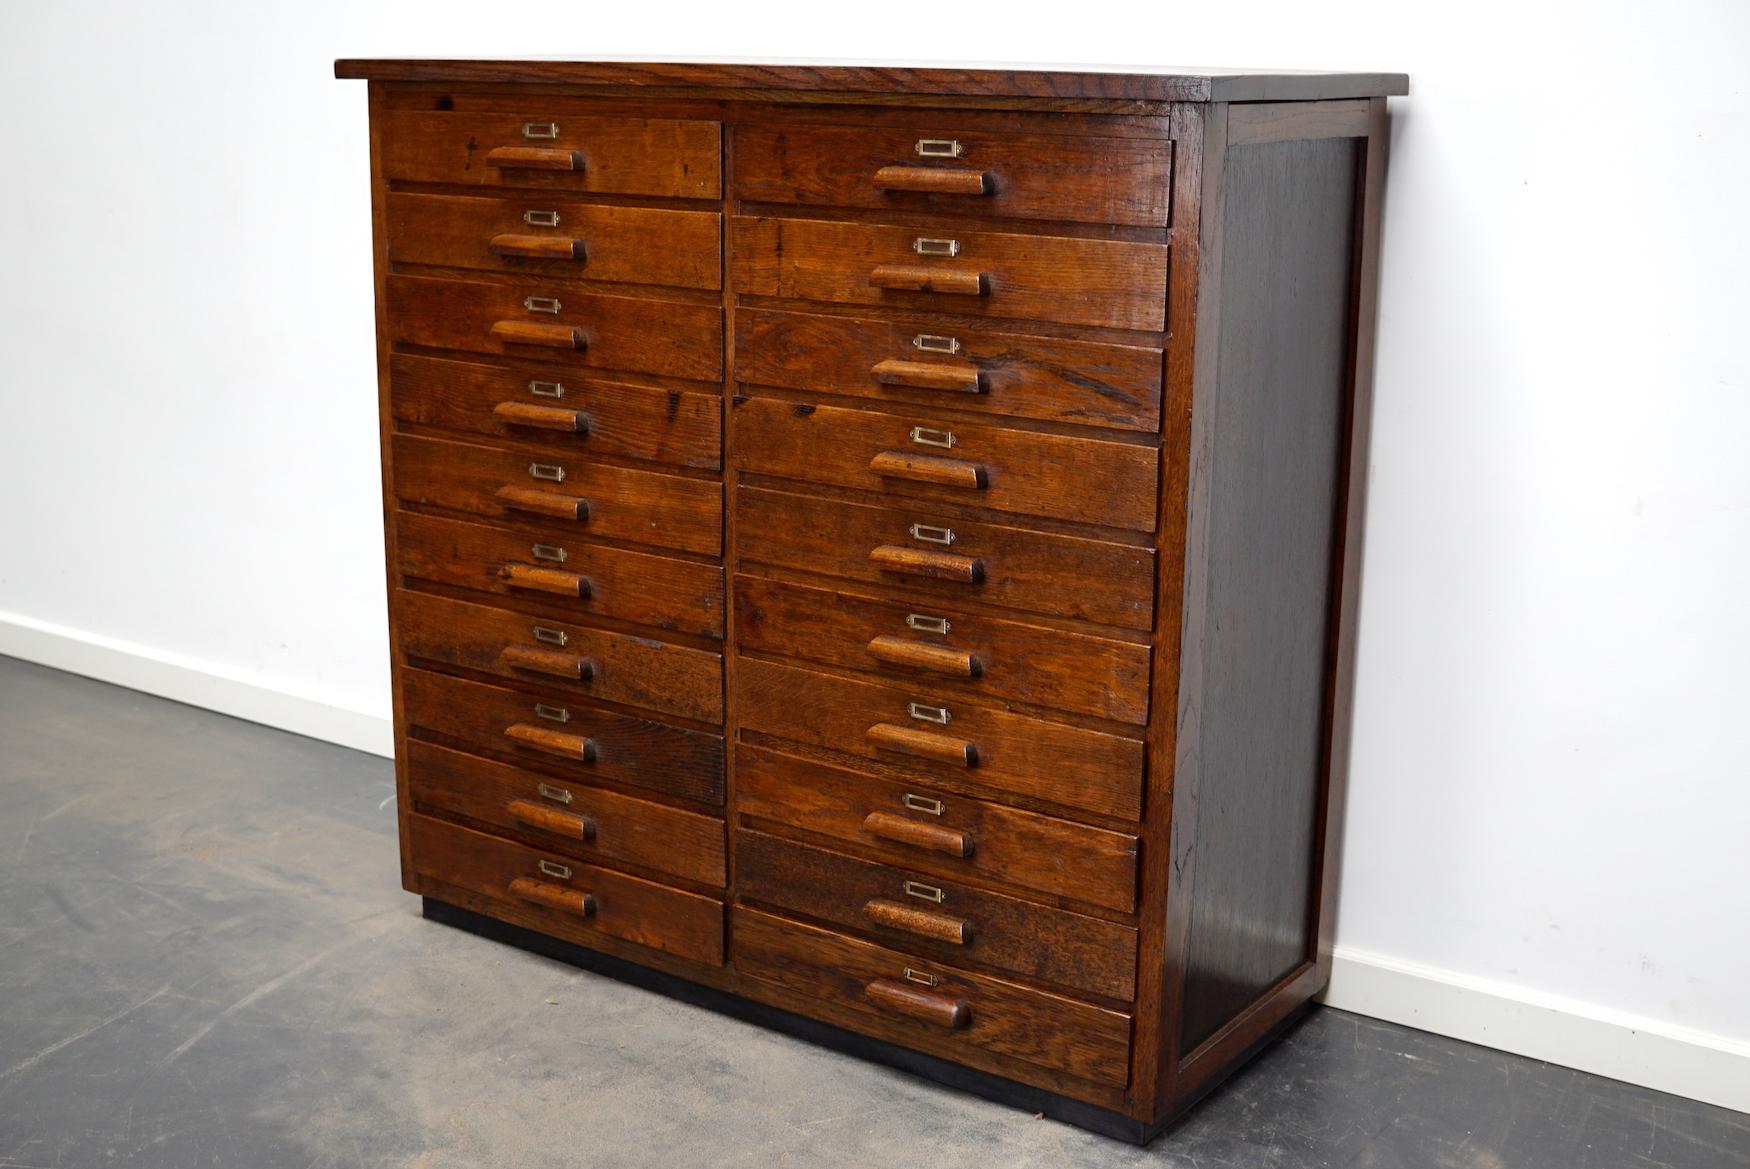 This apothecary cabinet was designed and made from oak circa 1930 in Germany. It features 20 drawers with wooden handles. The inside of the drawers measure: DWH 37 x 45 x 5.5 cm.